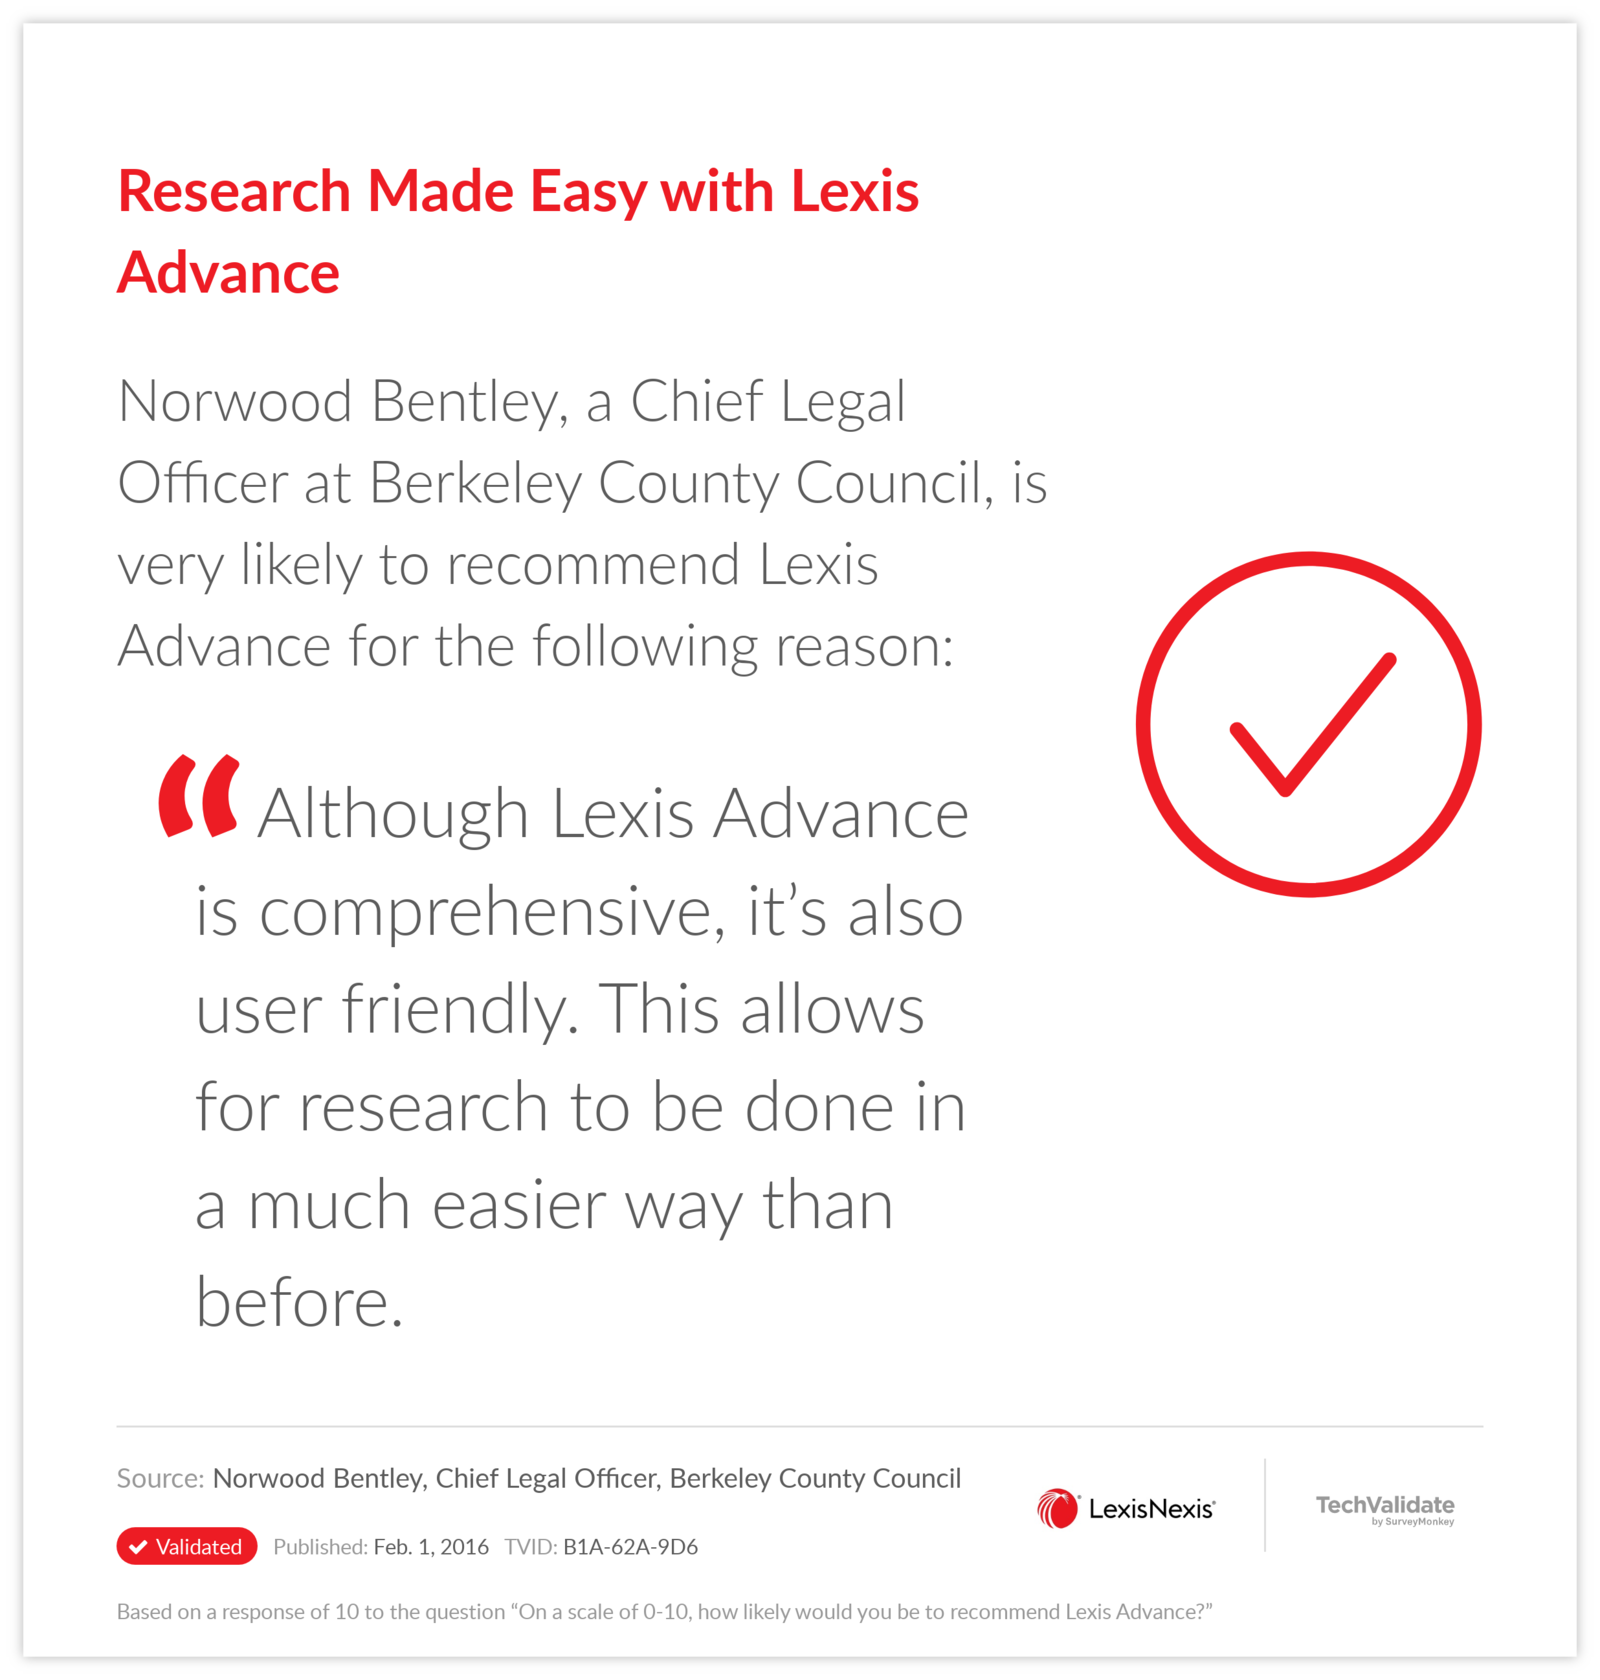 Research Made Easy with Lexis Advance